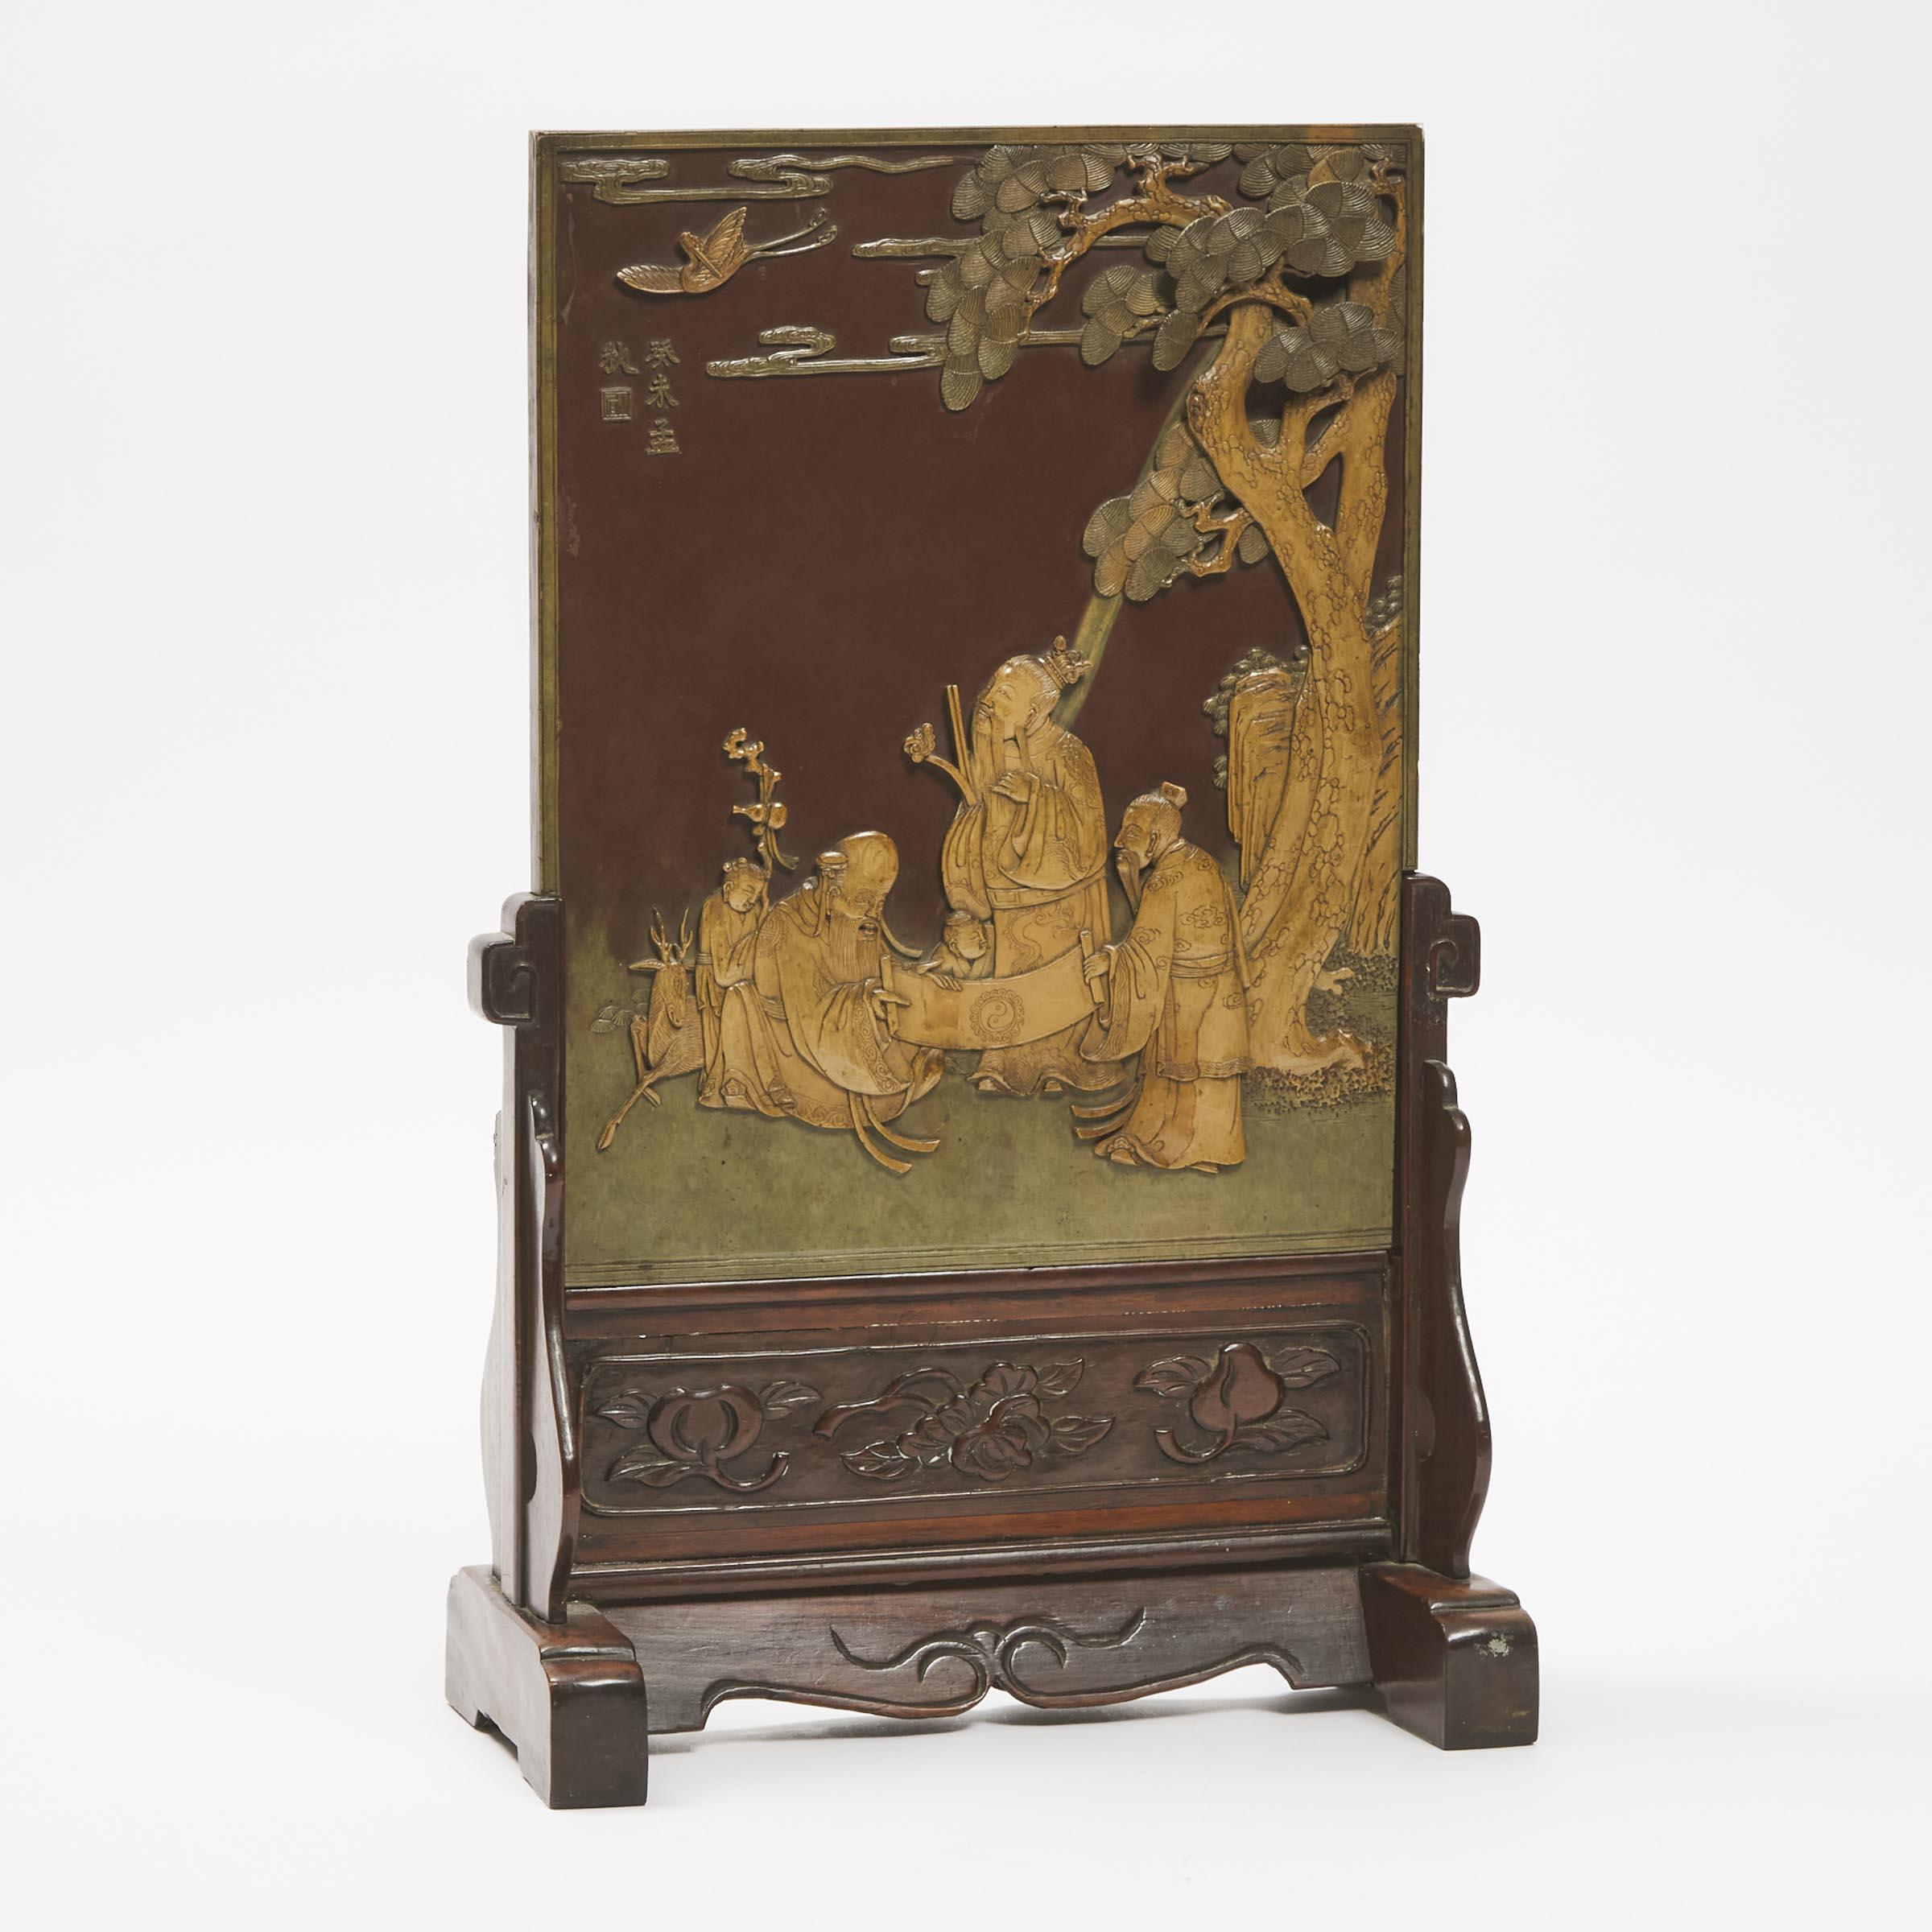 A Finely Carved Qiyang Stone Table Screen, Qing Dynasty, Dated 1823